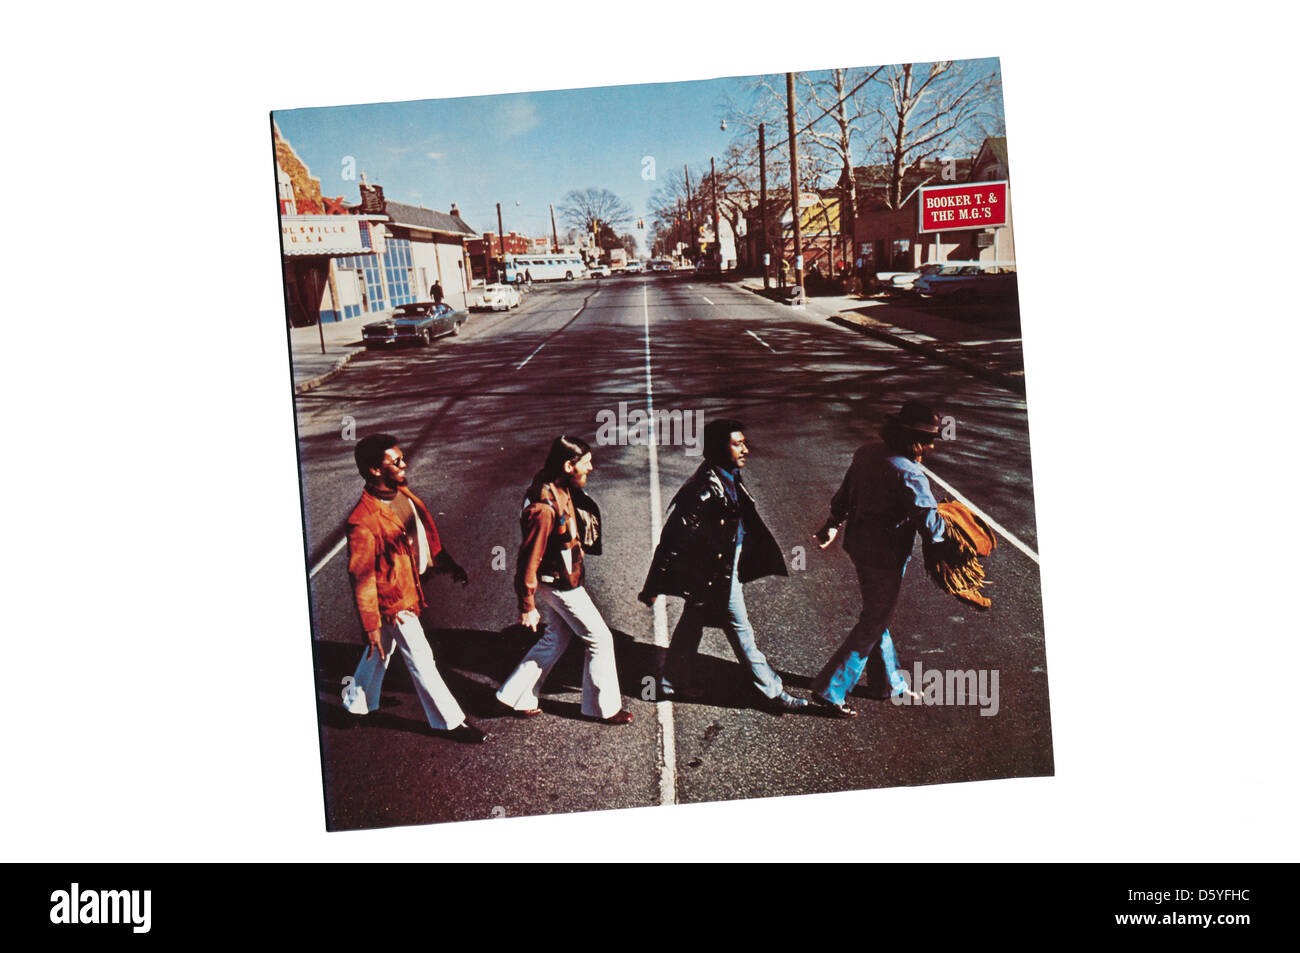 McLemore Avenue was a 1970 album by Booker T. & the MGs consisting of covers of songs from the Beatles album Abbey Road. Stock Photo